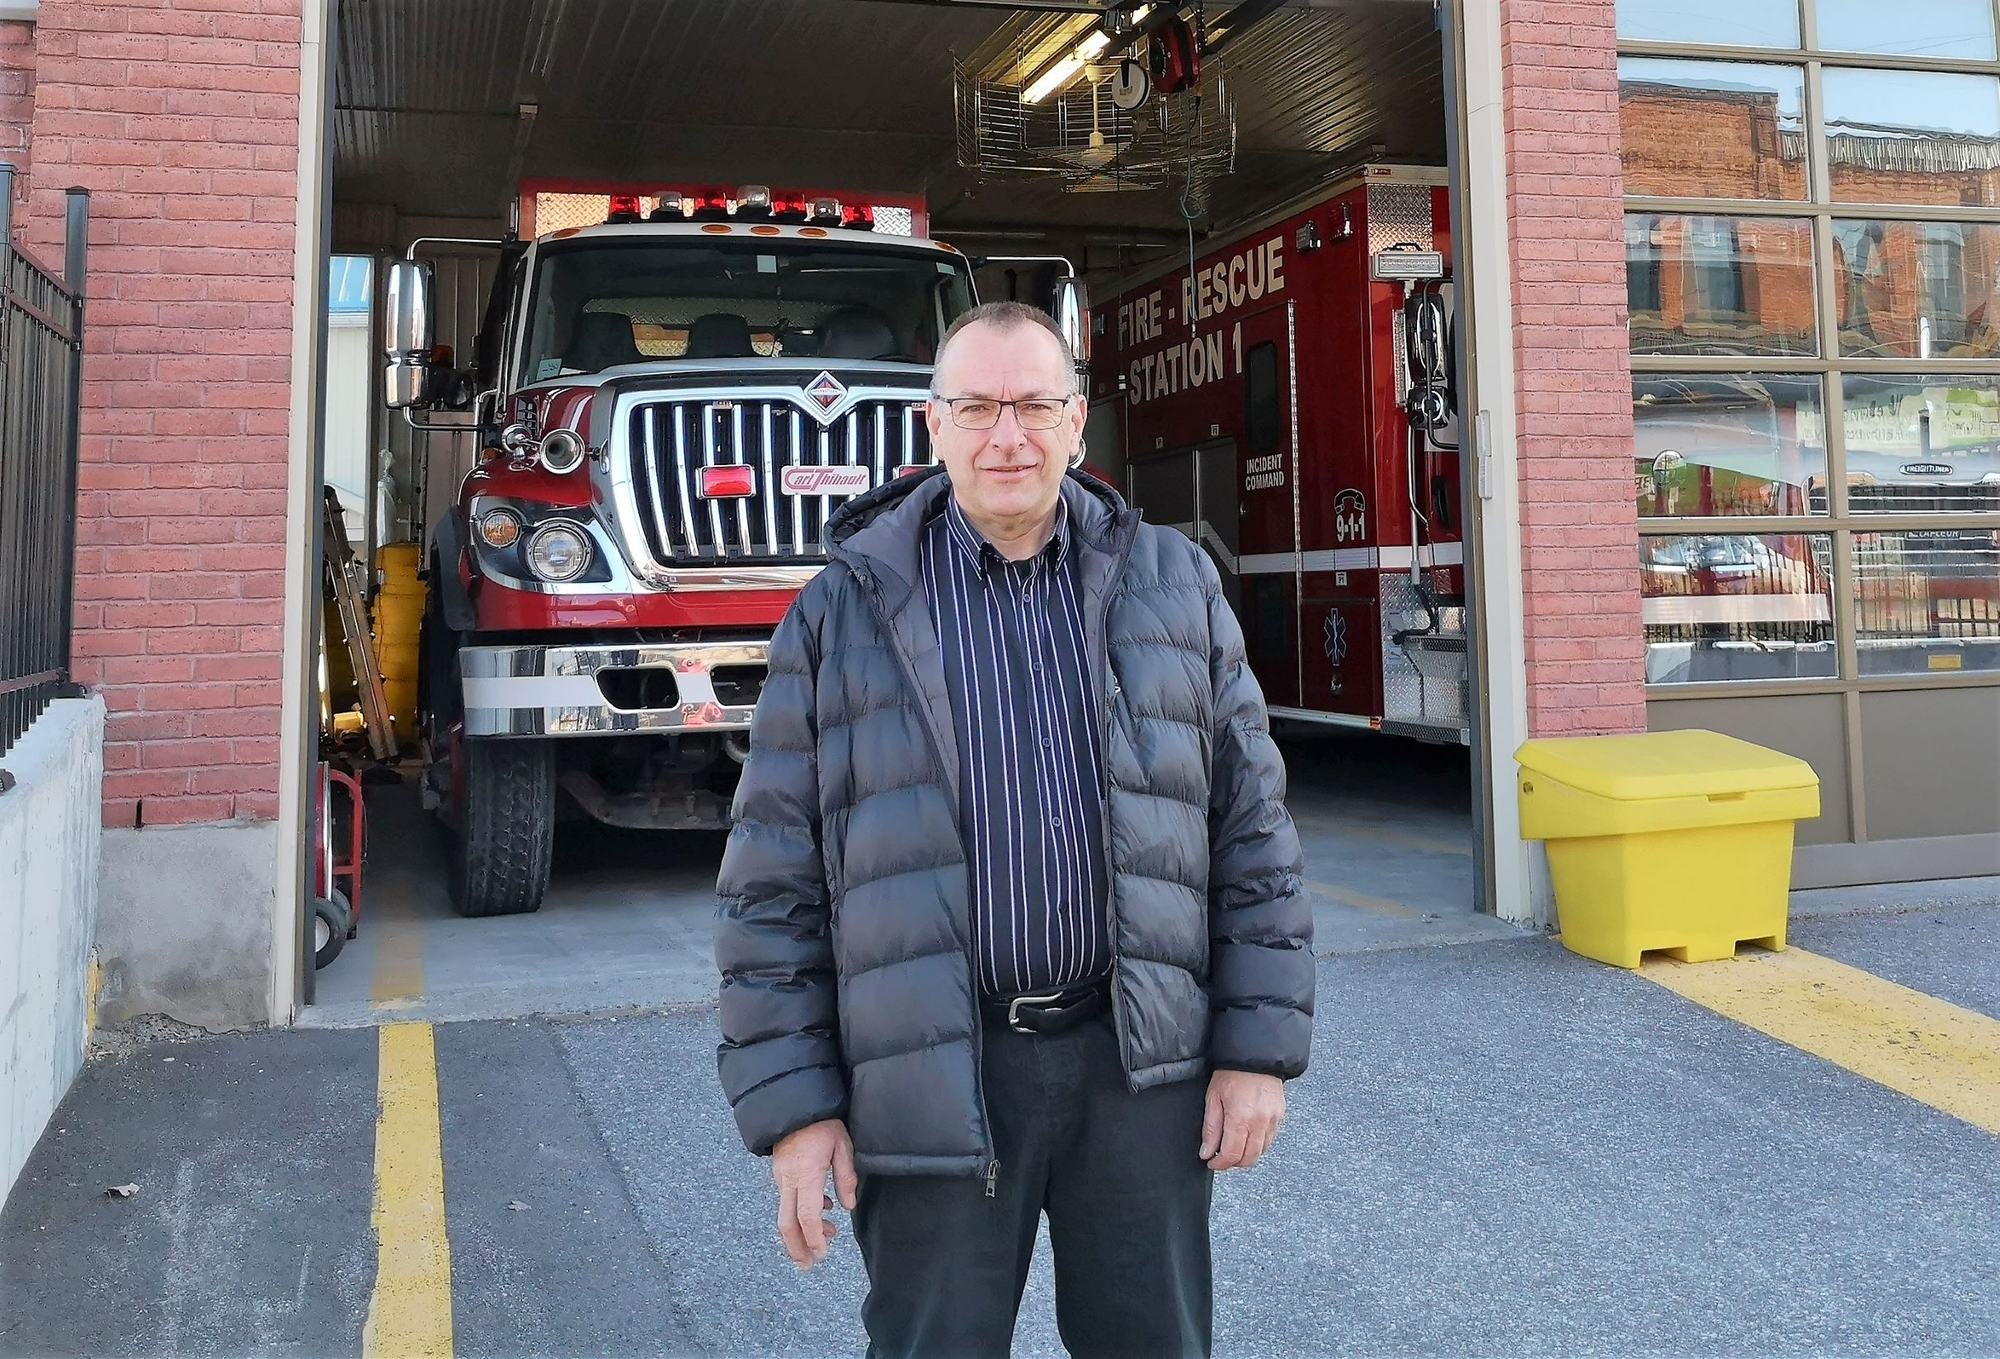 Champlain council makes single fire department and chief’s appointment official